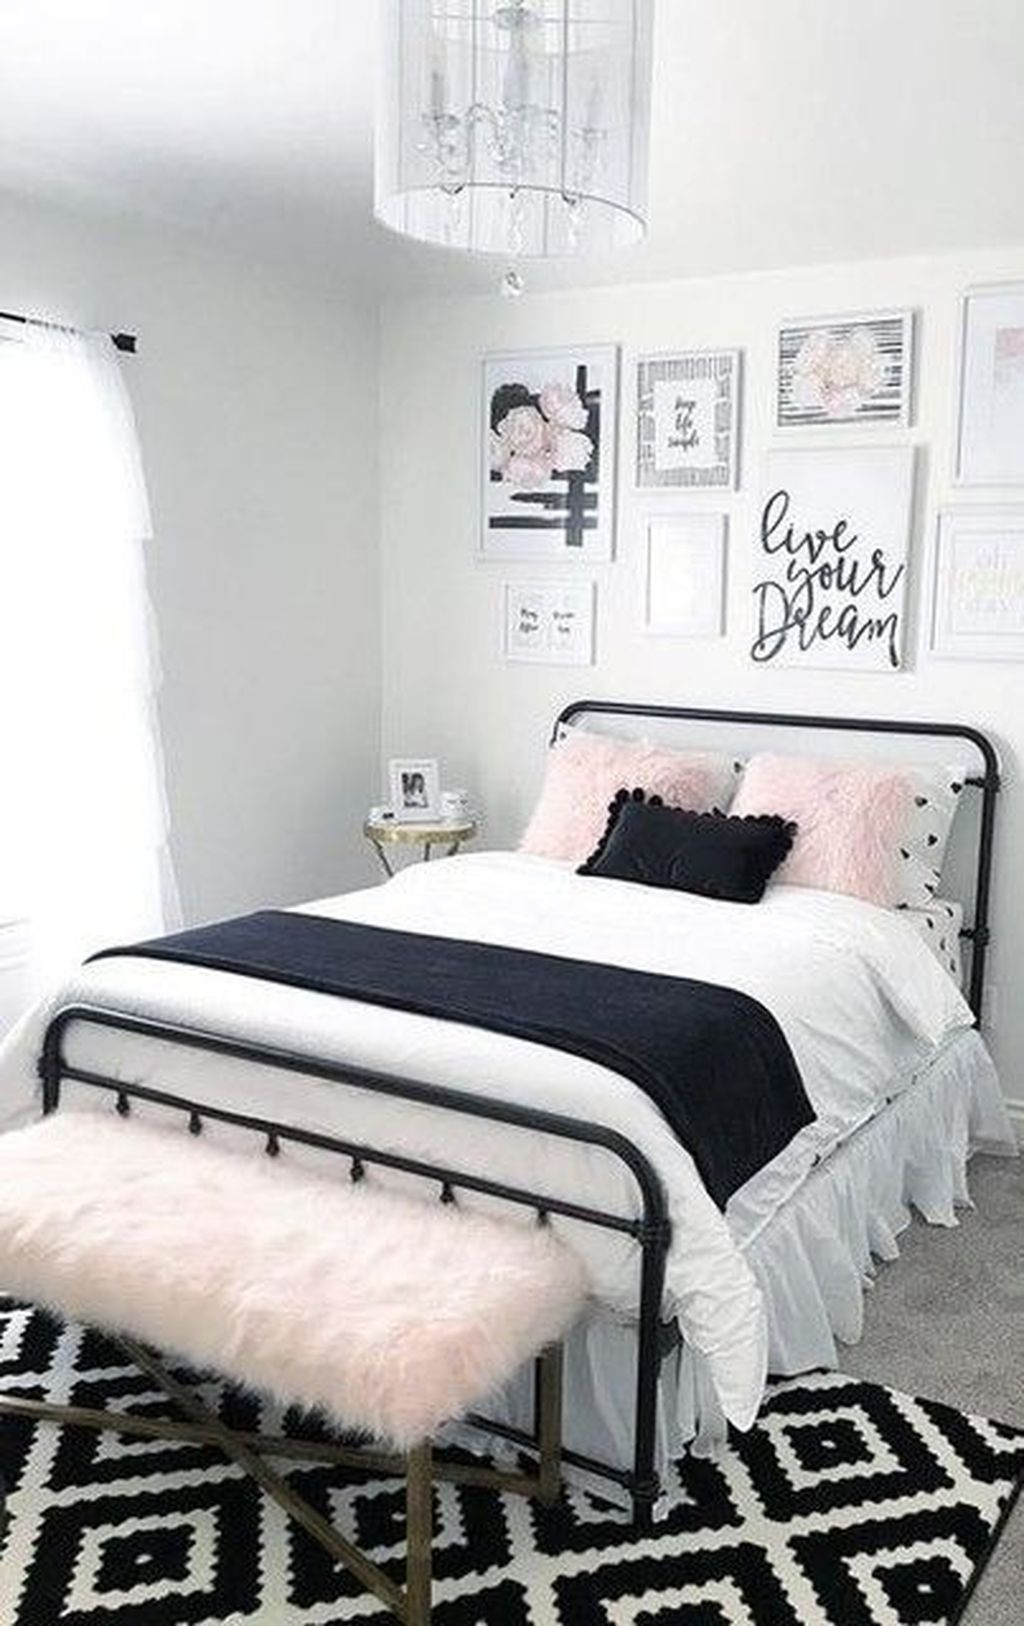 Admiring Bedroom Decor Ideas To Have Right Now 22